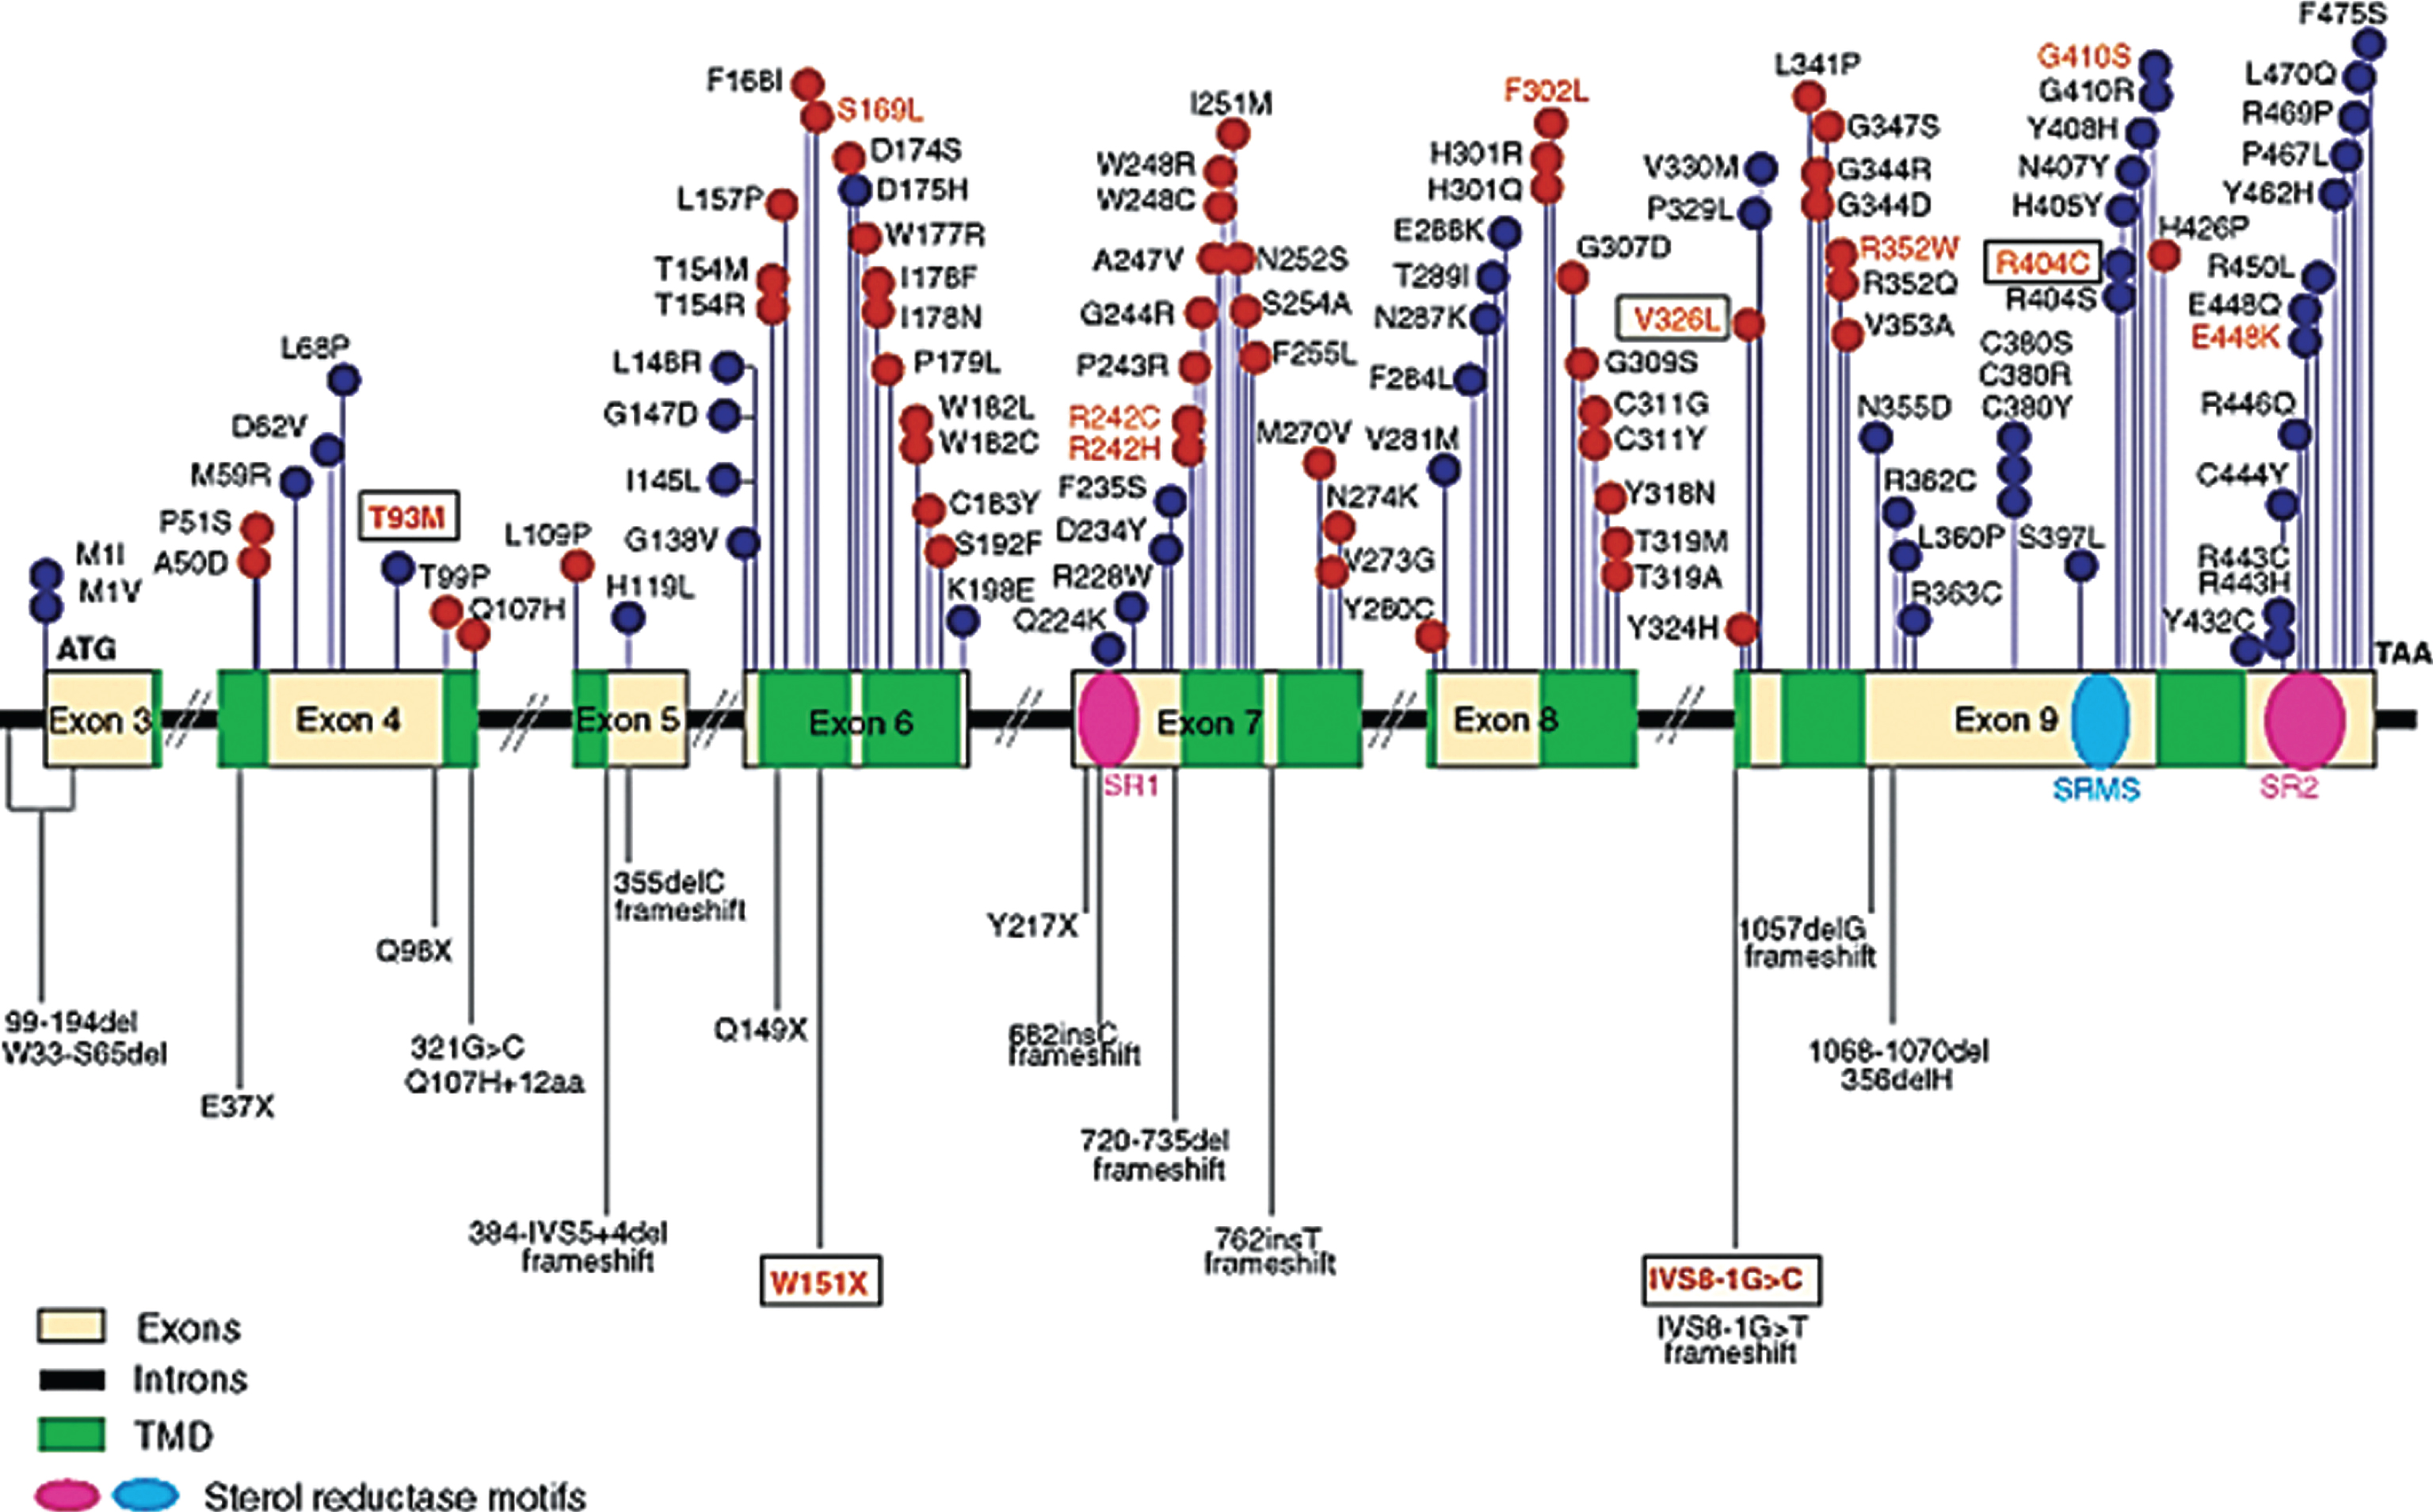 Some mutations in the DHCR7 gene. TMD: transmembrane domains. From Yu and Patel, [140], with permission.